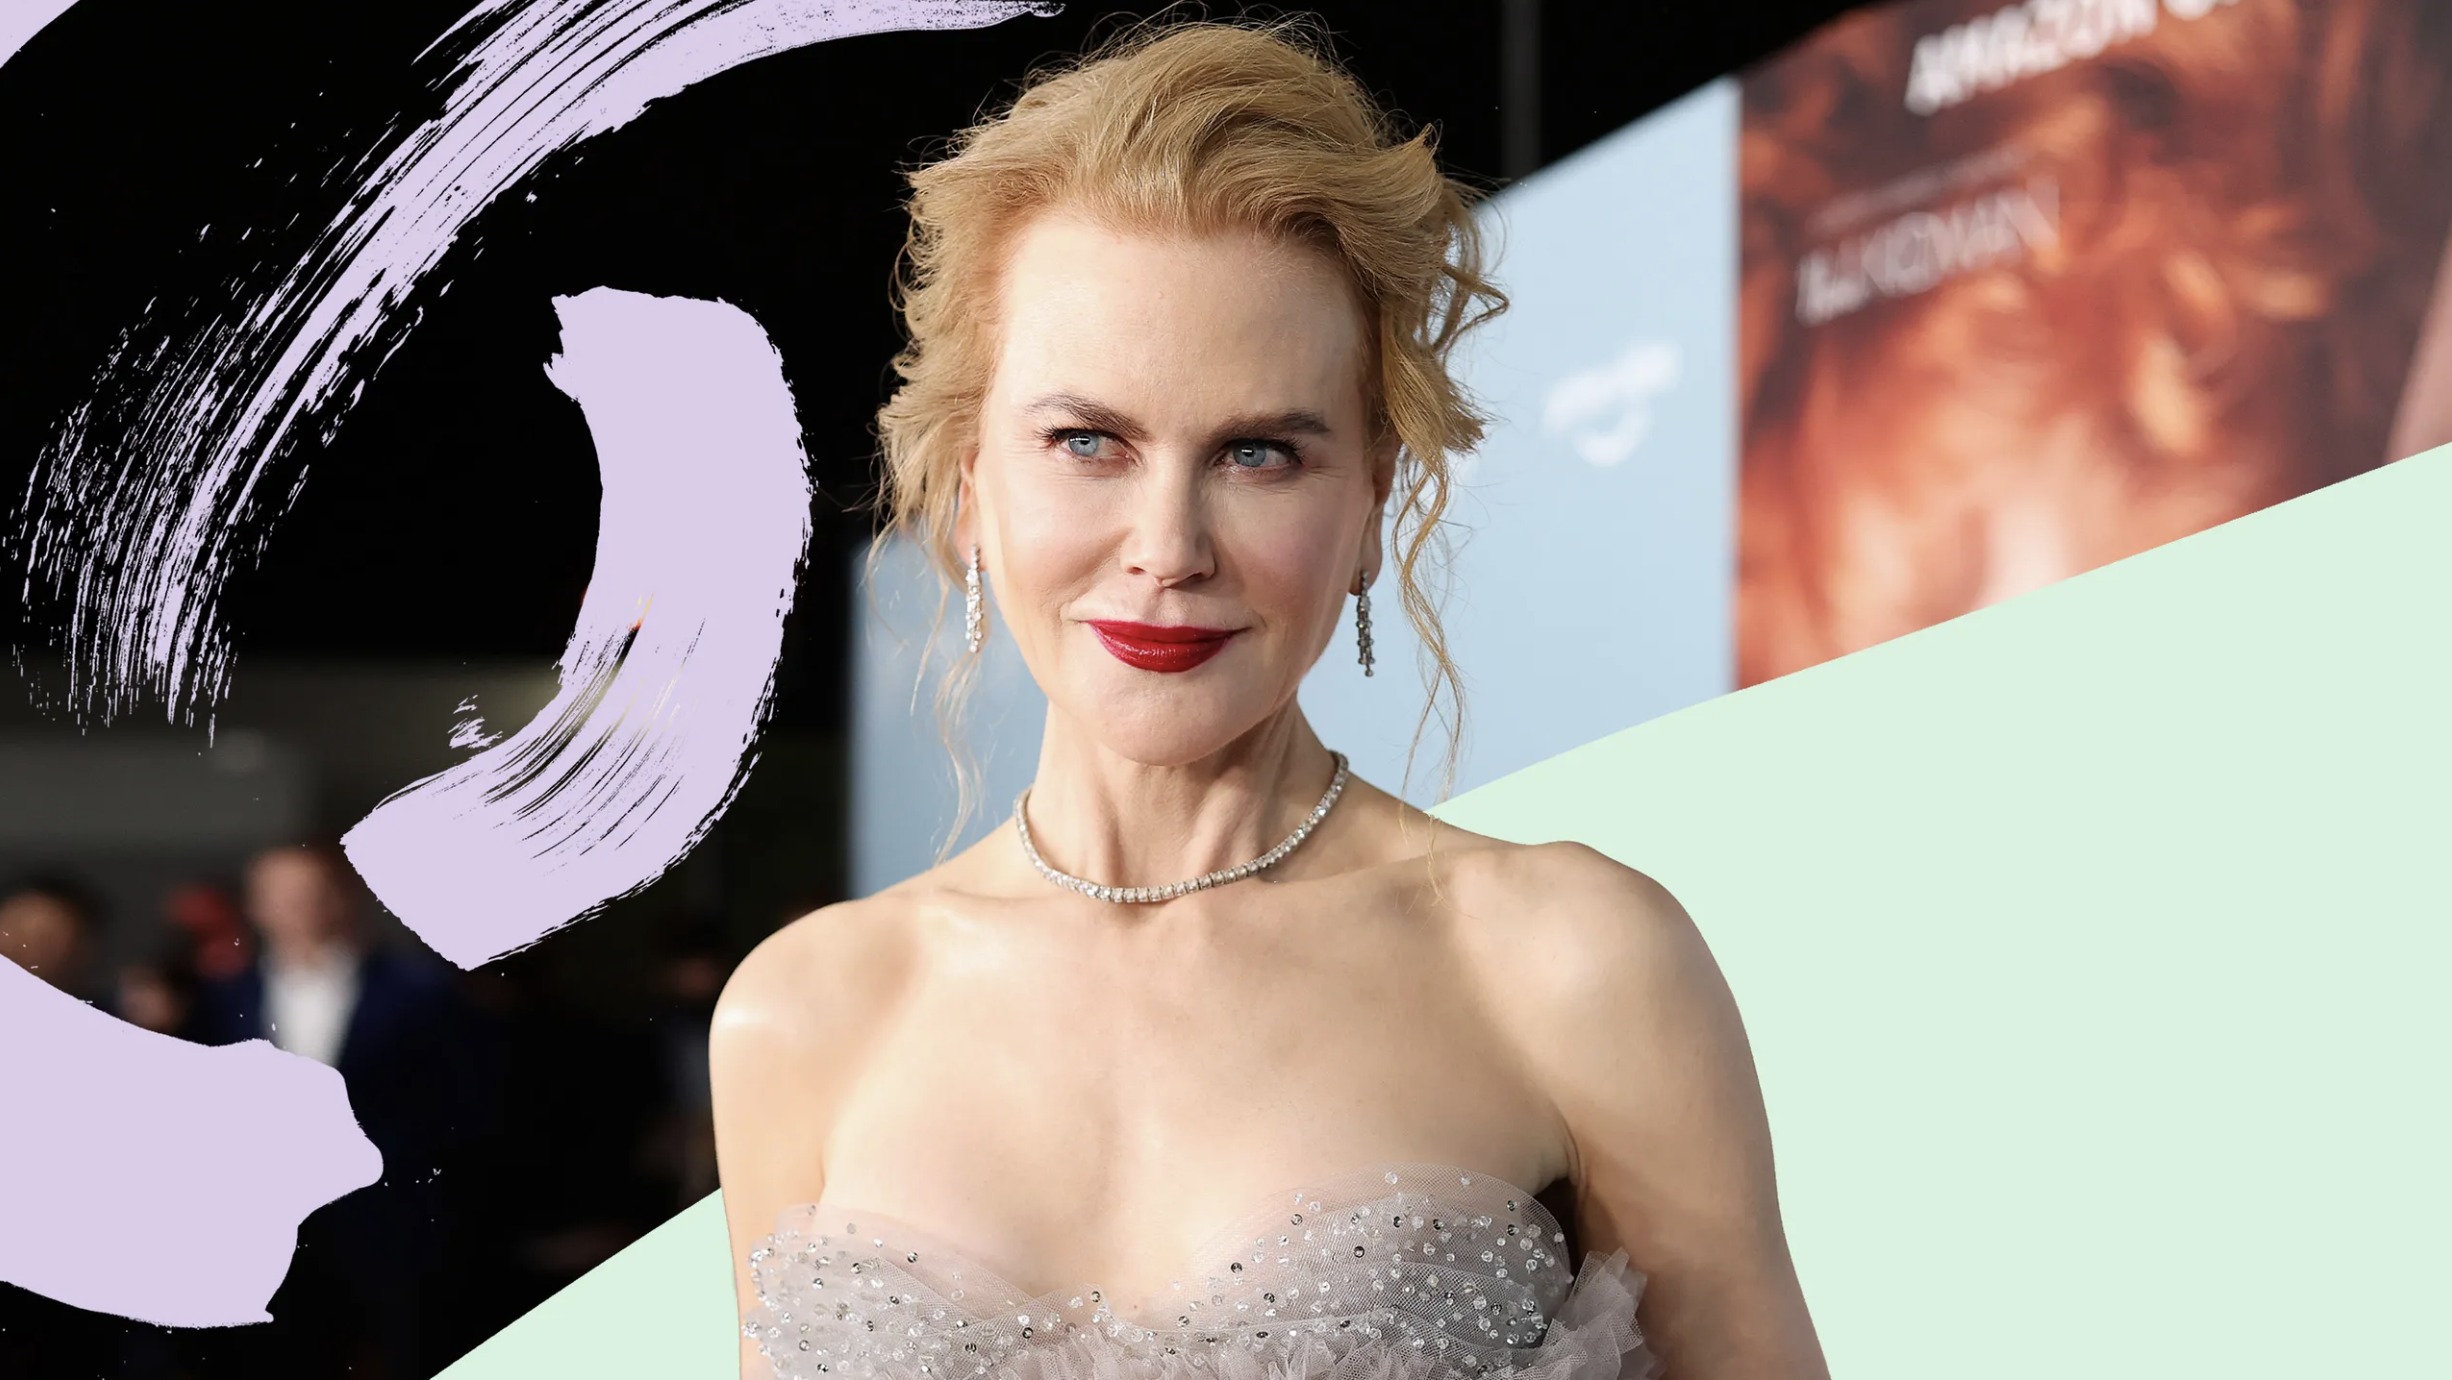 Nicole Kidman Hails This Attribute as Her ‘Superpower’ in Converting Rejections into an Oscar-Winning Journey.